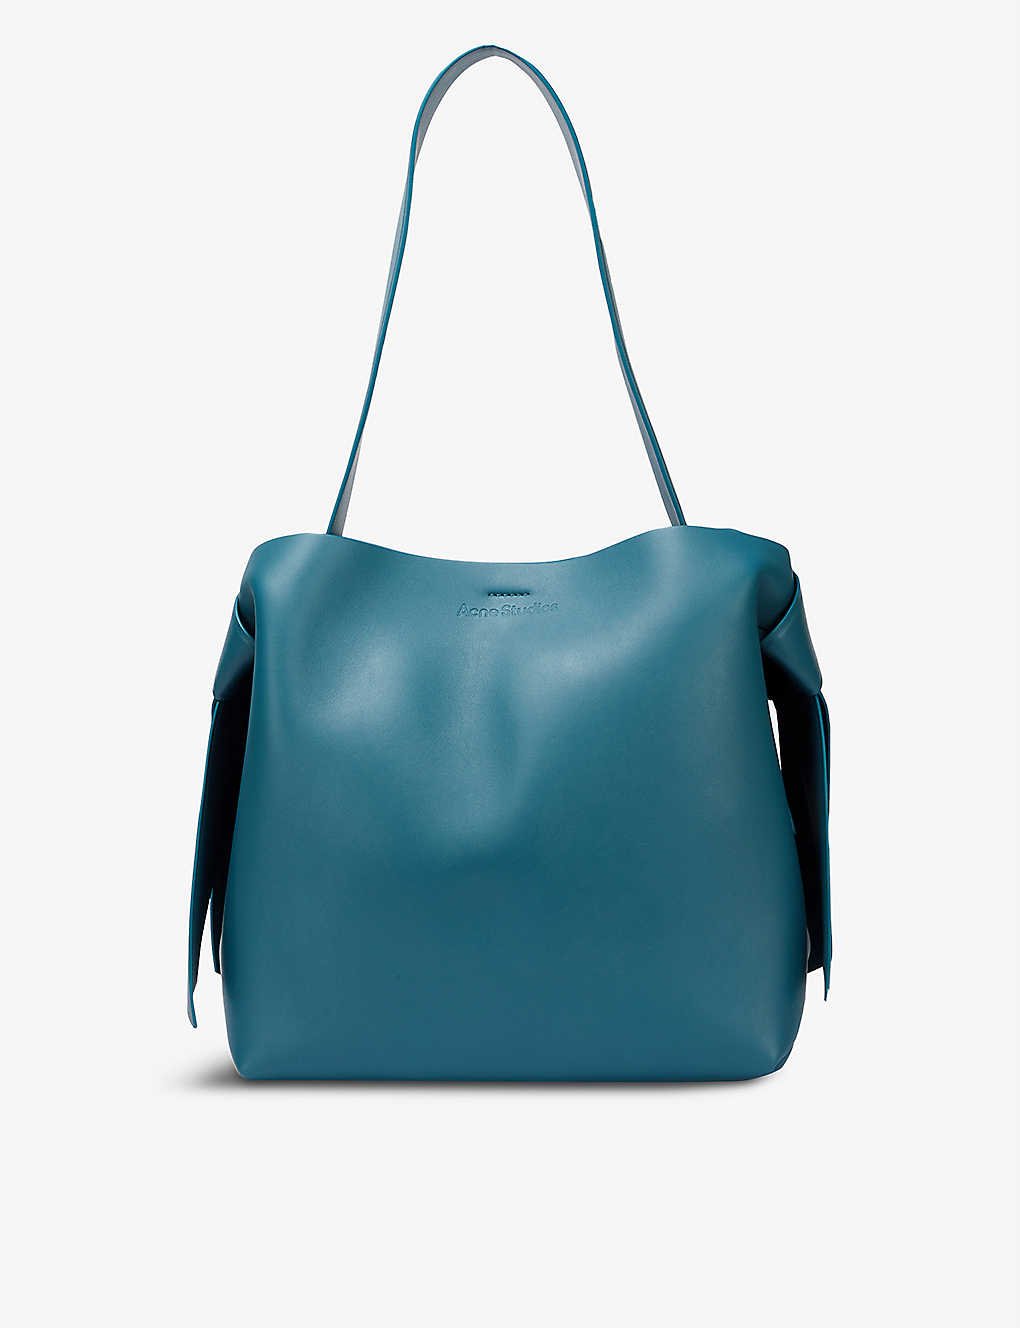 Midi knotted leather tote